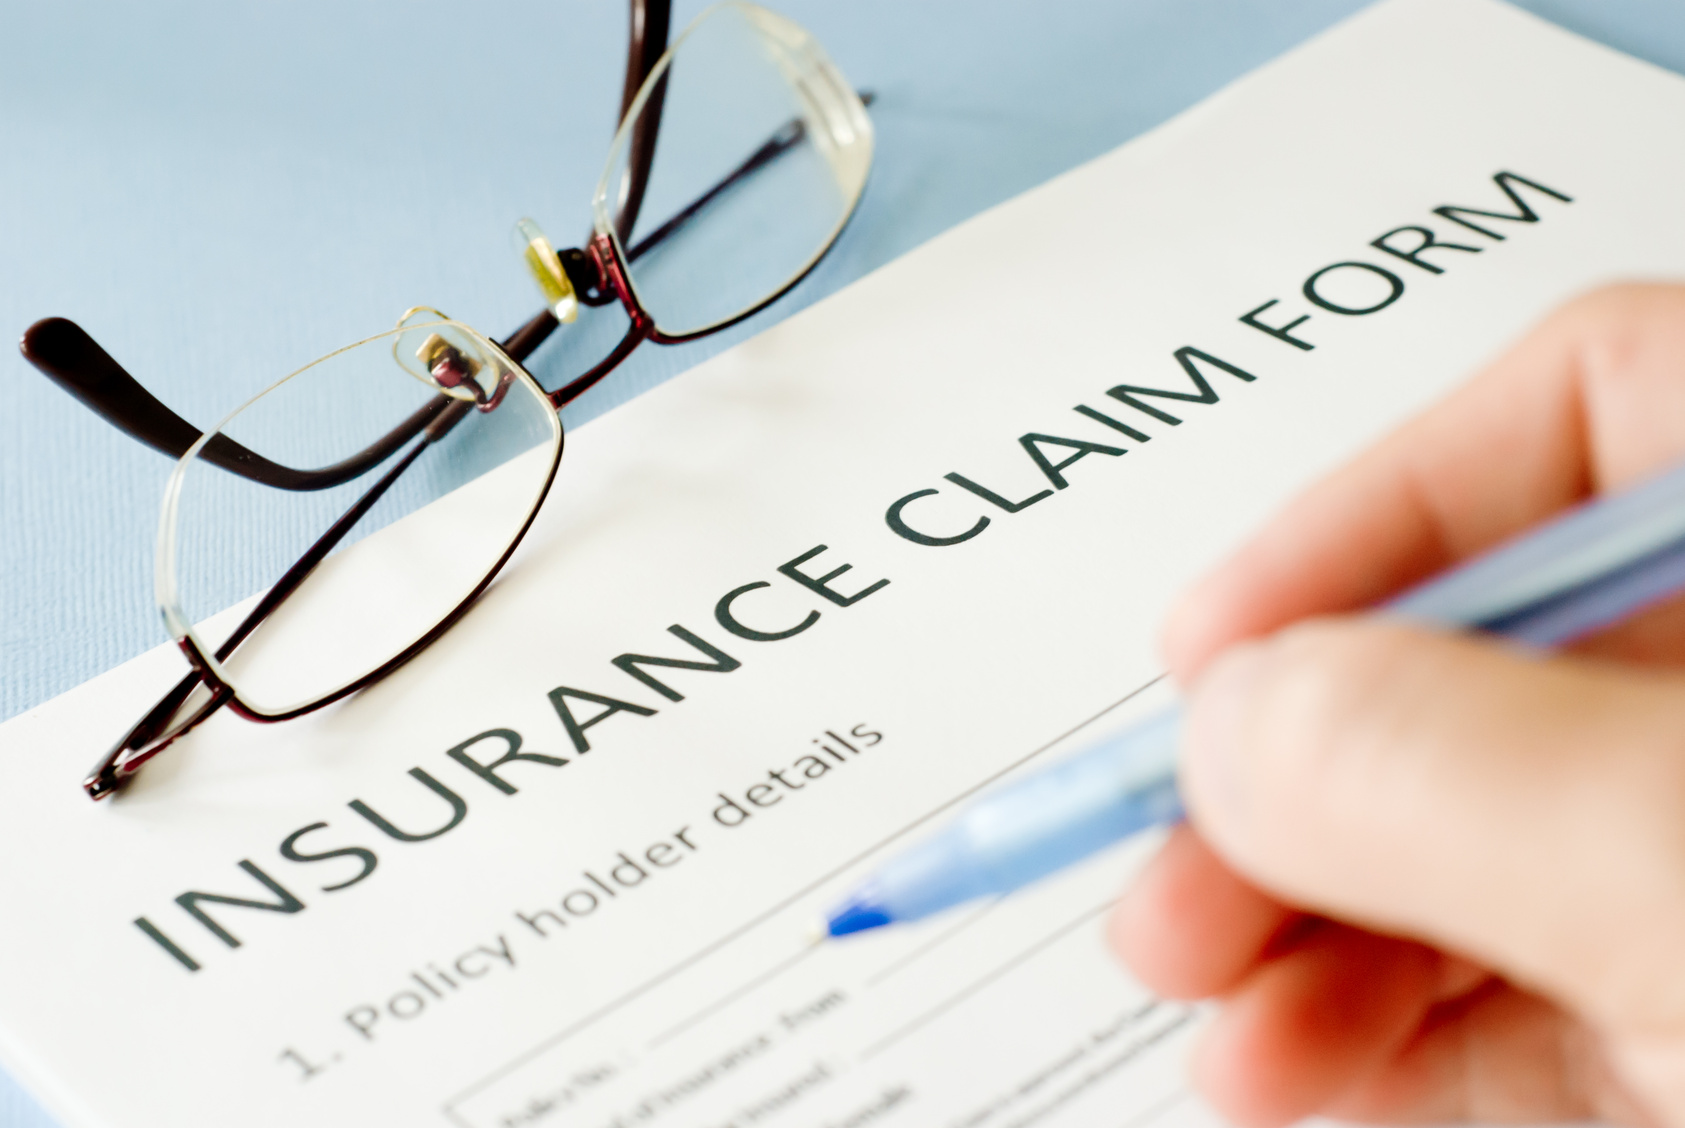 How quickly do insurance companies need to respond?